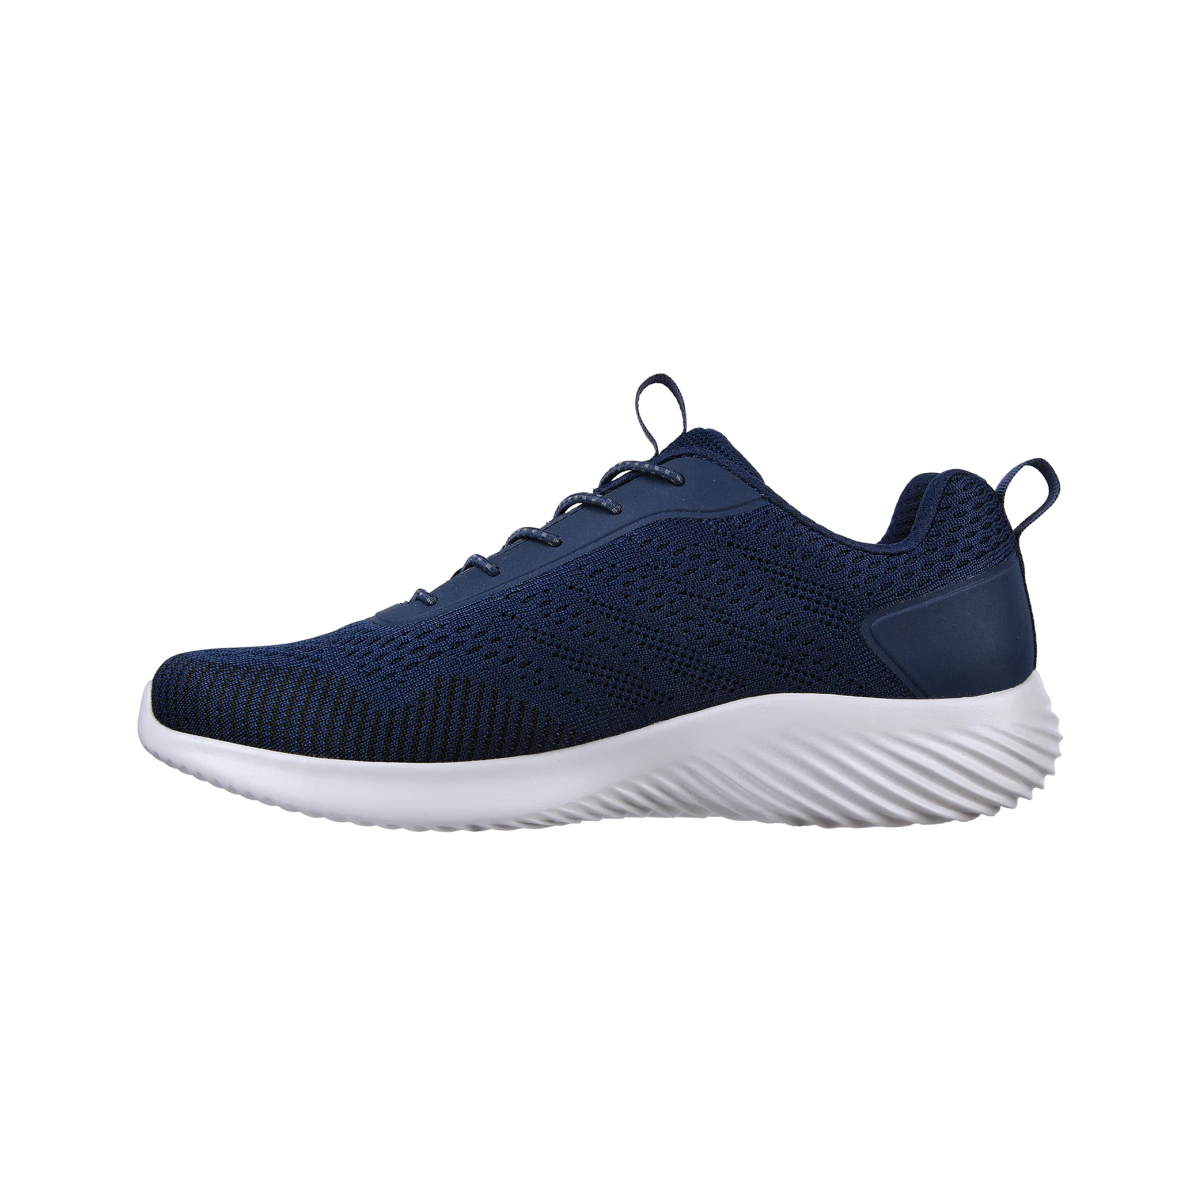 Skechers Sports Bounder Intread Shoes For Men, Navy